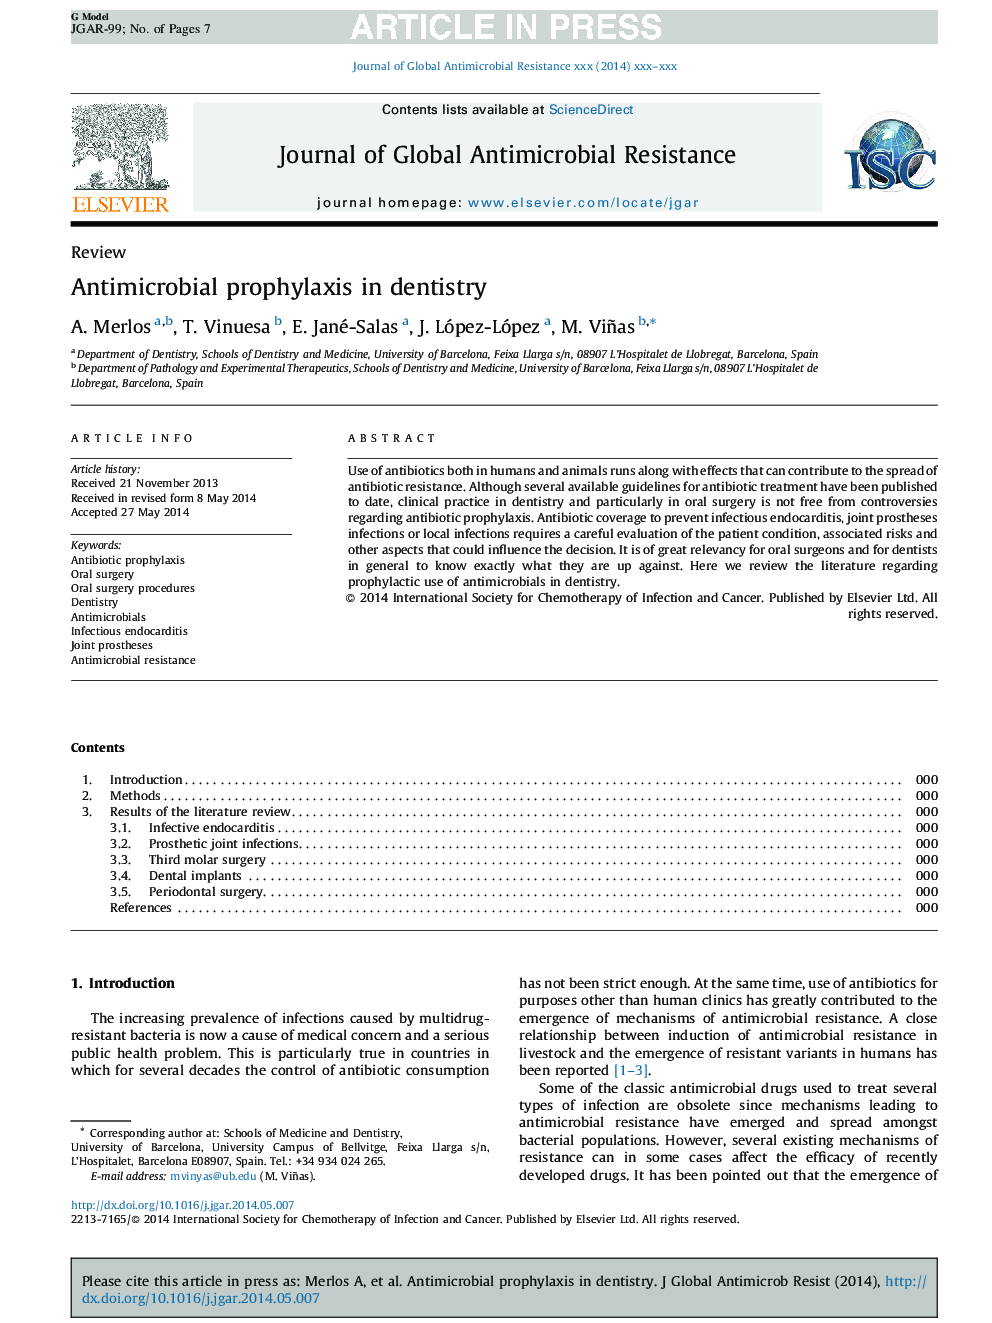 Antimicrobial prophylaxis in dentistry